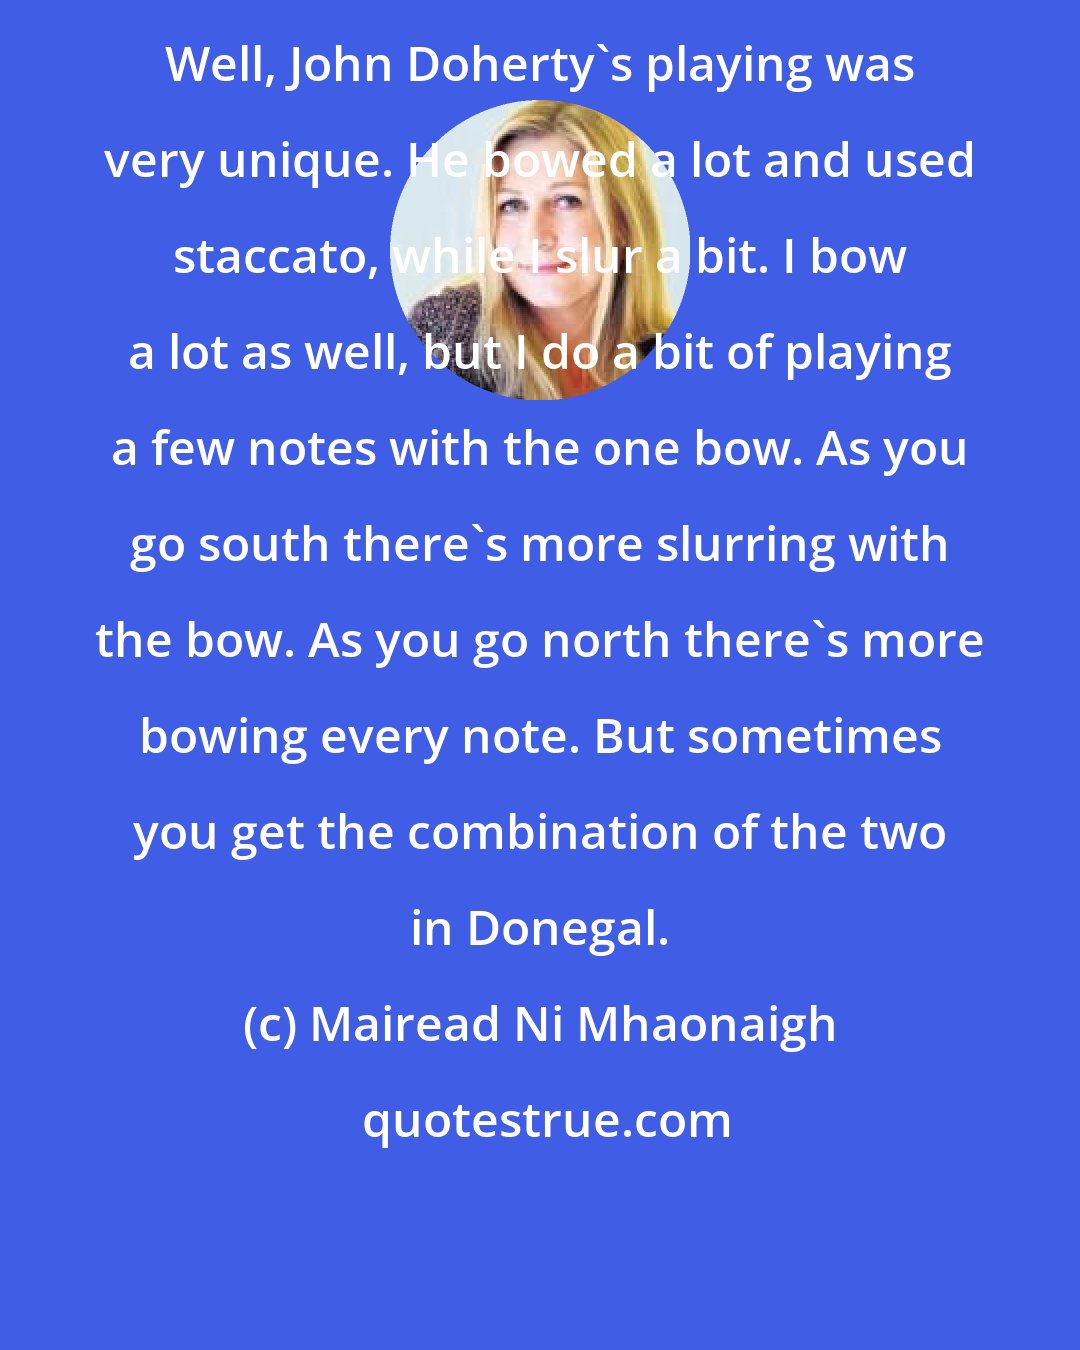 Mairead Ni Mhaonaigh: Well, John Doherty's playing was very unique. He bowed a lot and used staccato, while I slur a bit. I bow a lot as well, but I do a bit of playing a few notes with the one bow. As you go south there's more slurring with the bow. As you go north there's more bowing every note. But sometimes you get the combination of the two in Donegal.